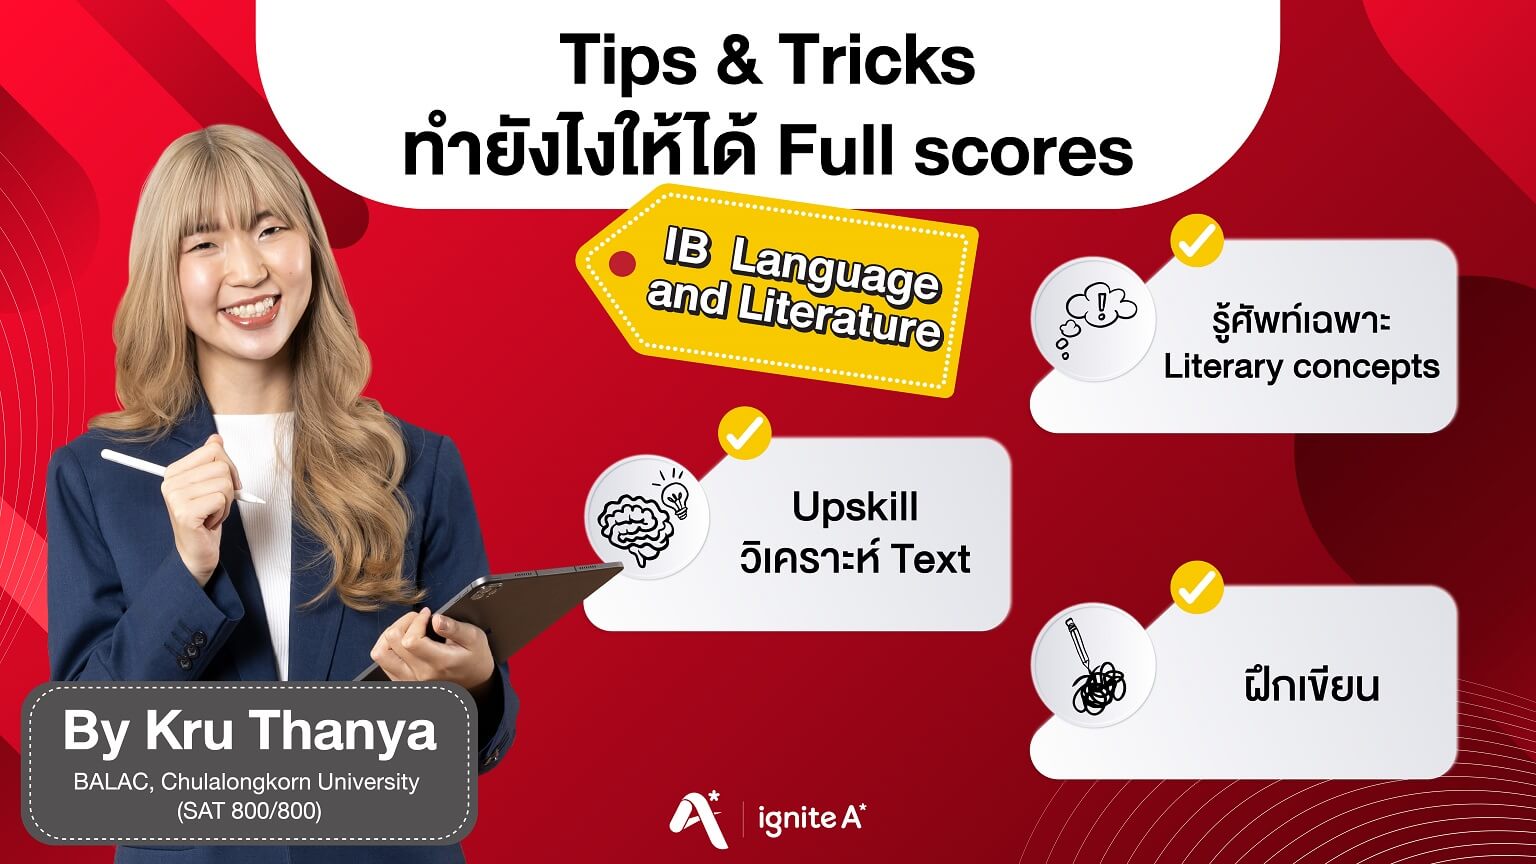 tips and tricks to get full score on IB language & literature by Ignite A*